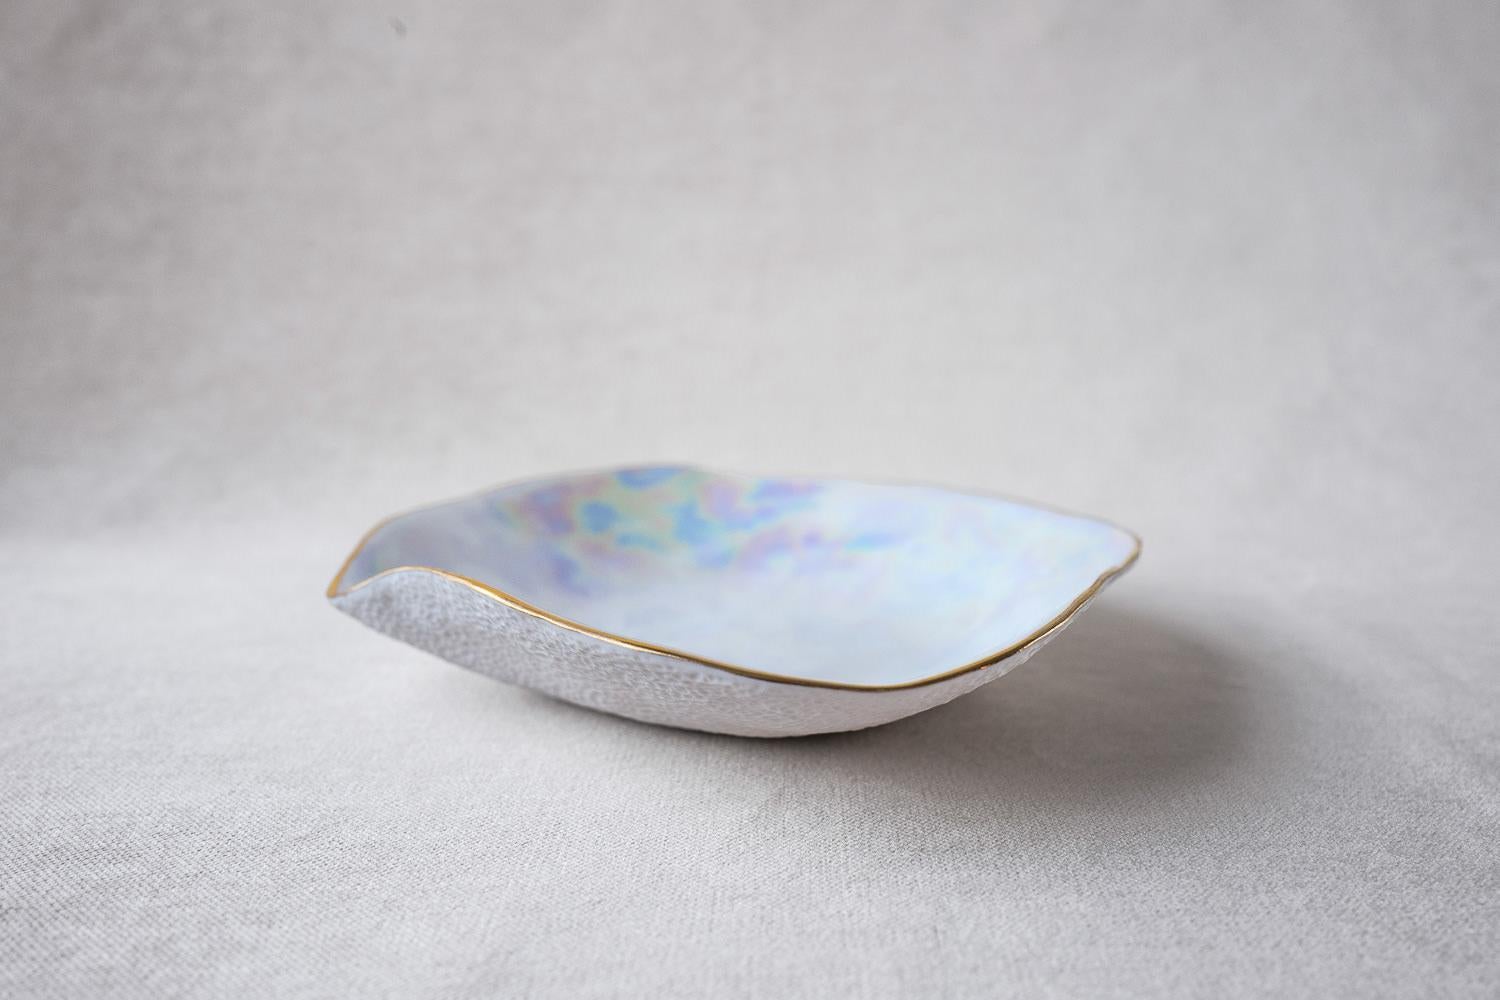 • Small plate
• Measures: 18cm x 17cm x 4cm 
• Perfect for a starter, dessert or side dish
• Glamorous iridescent glazed top, textured bottom
• With a very luxurious 24k handpainted golden rim
• Designed in Amsterdam / handmade in France
•